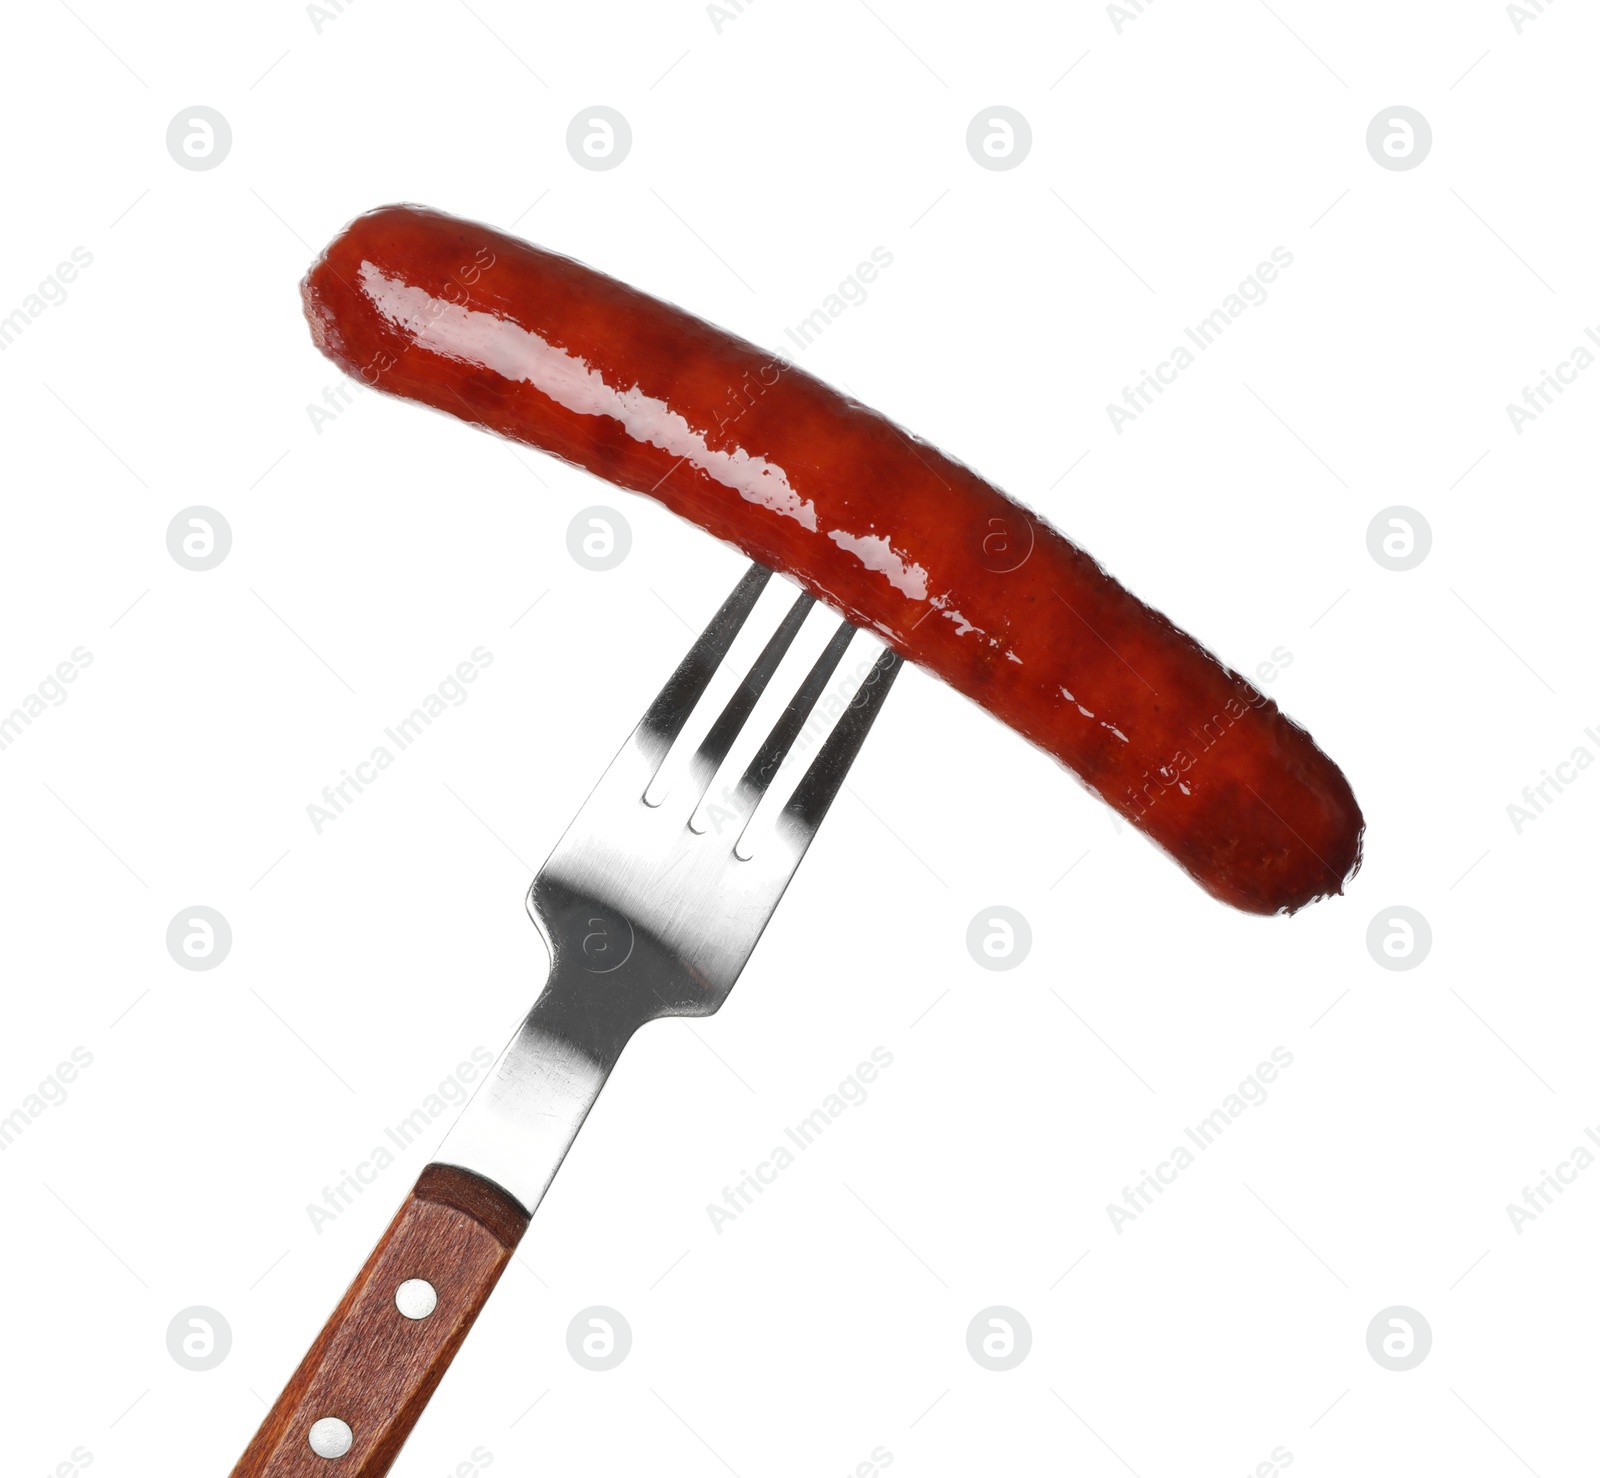 Photo of Delicious grilled sausage on fork against white background. Barbecue food